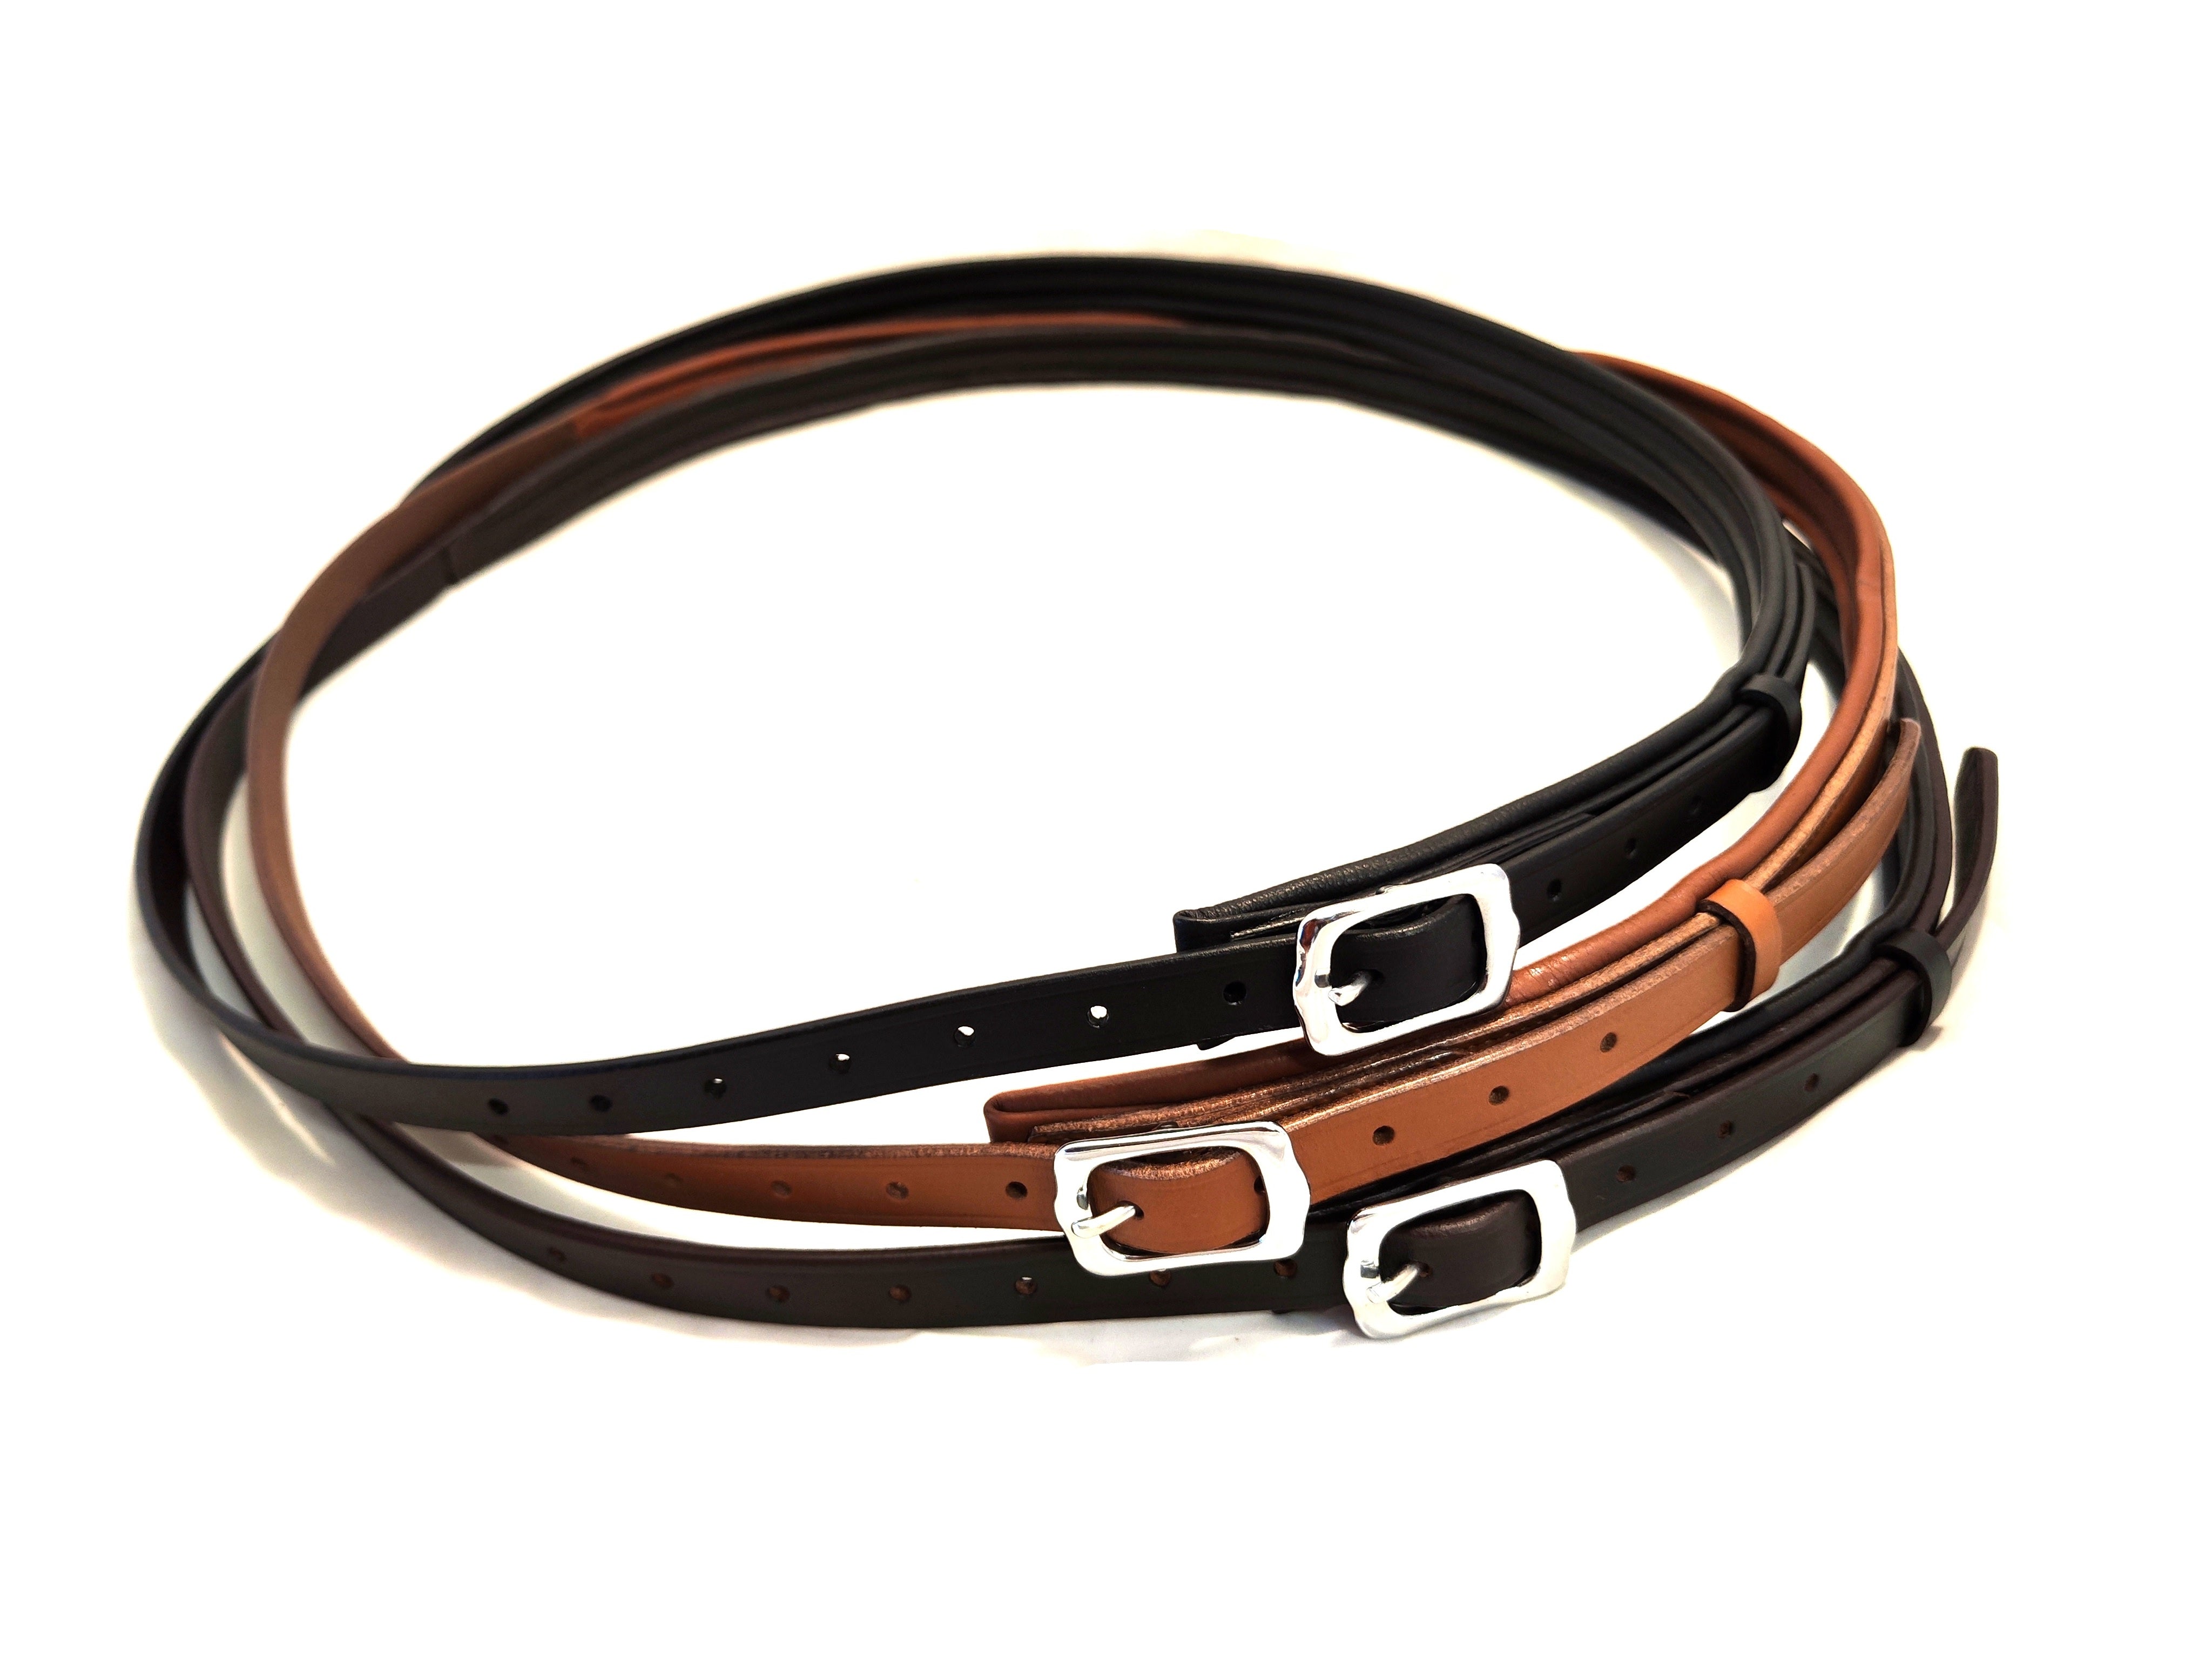 Leather neck ring neck strap "Flat" for horses, adjustable padded